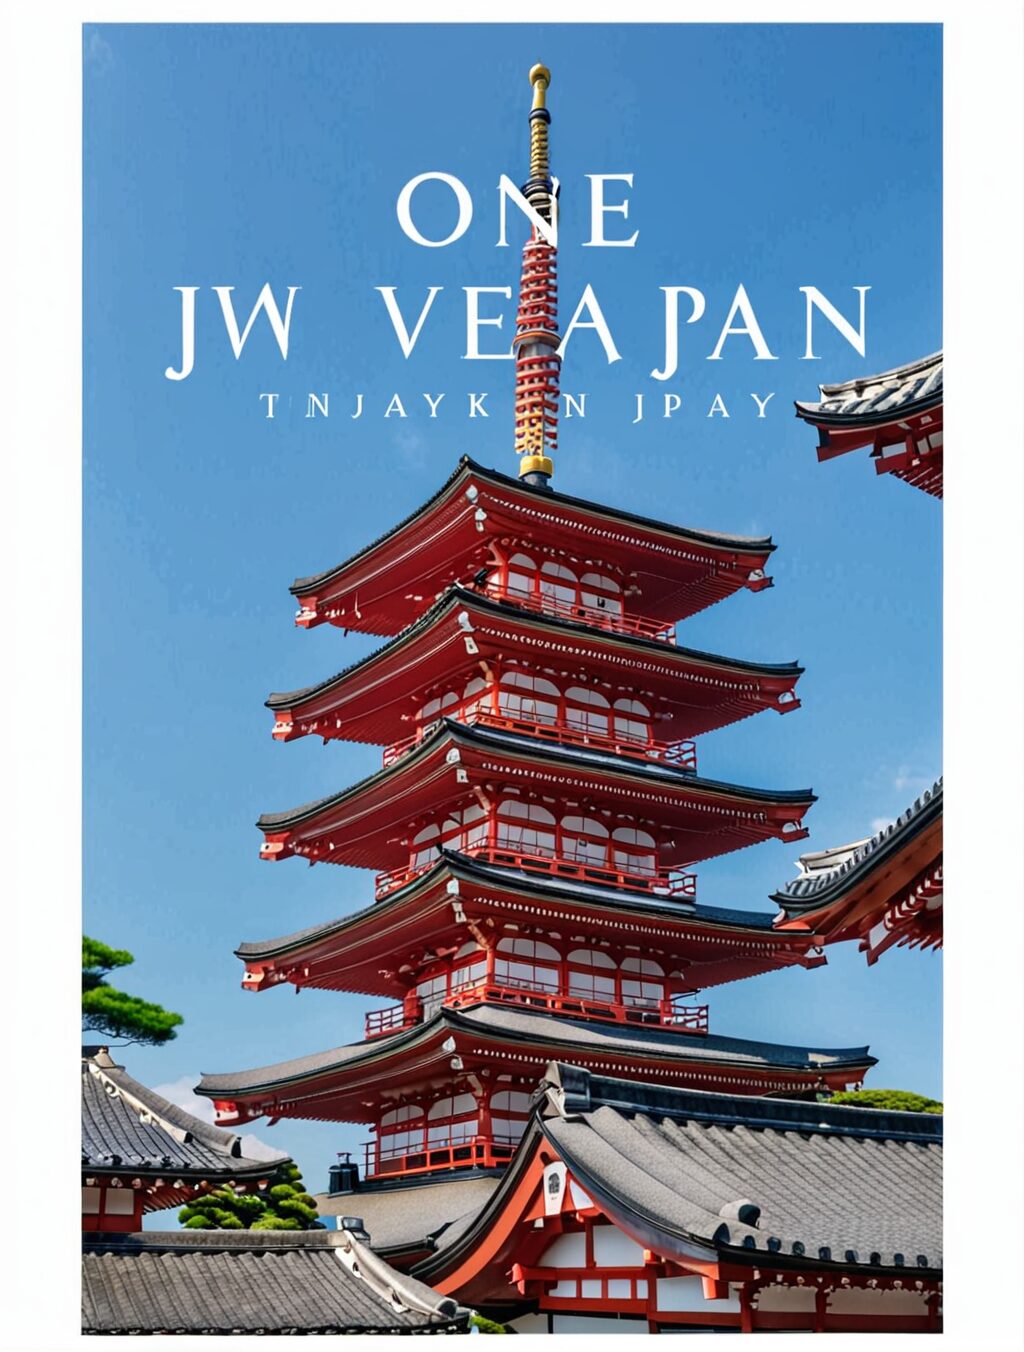 one week in japan itinerary